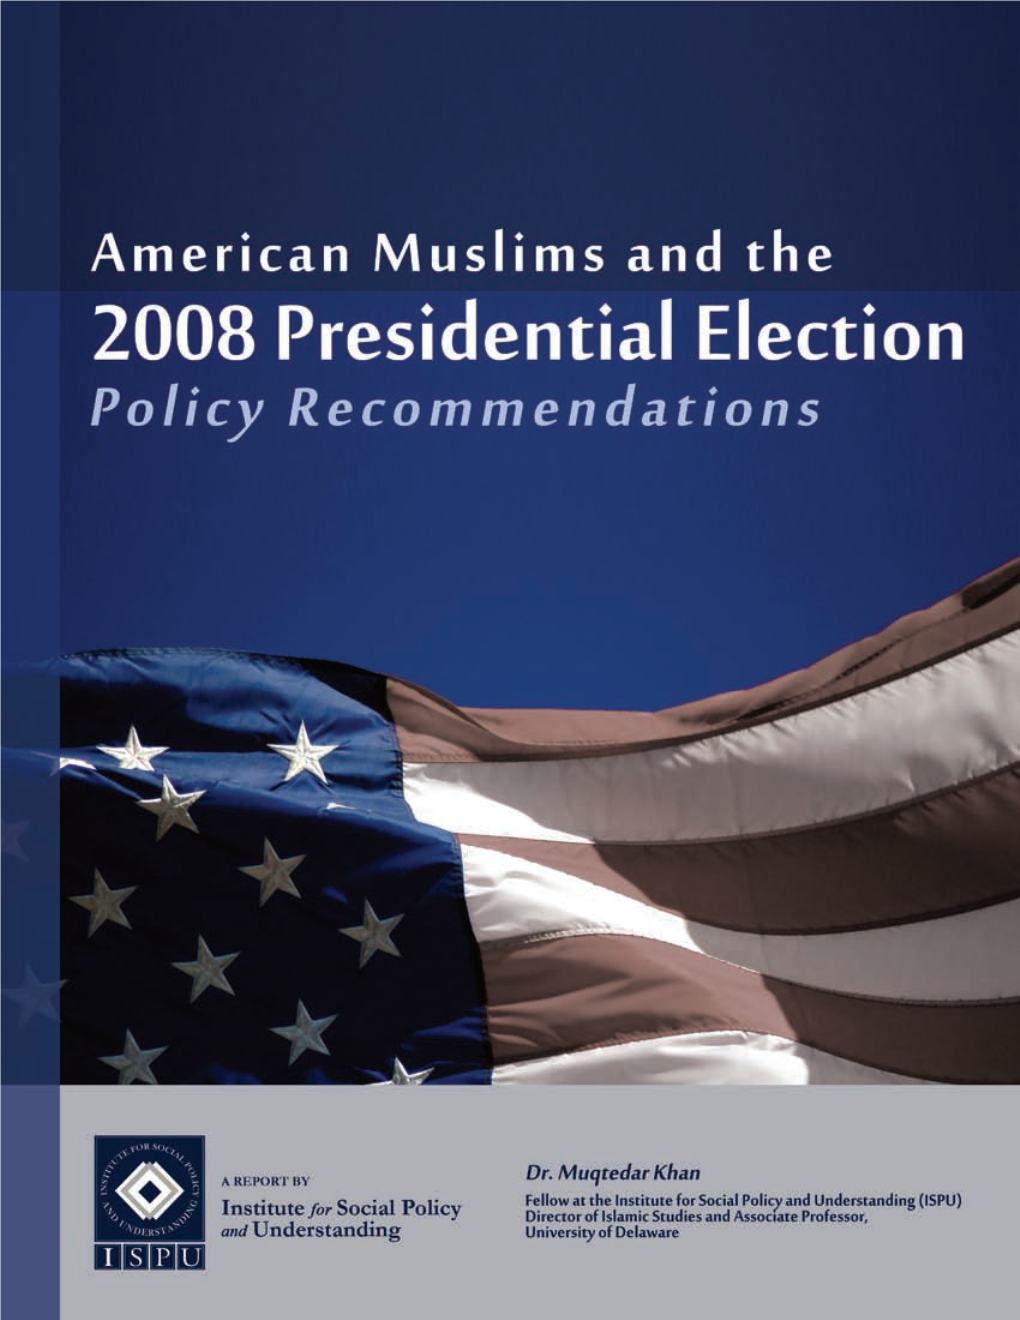 ISPU: American Muslims and the 2008 Presidential Election 1 Contents About the Author